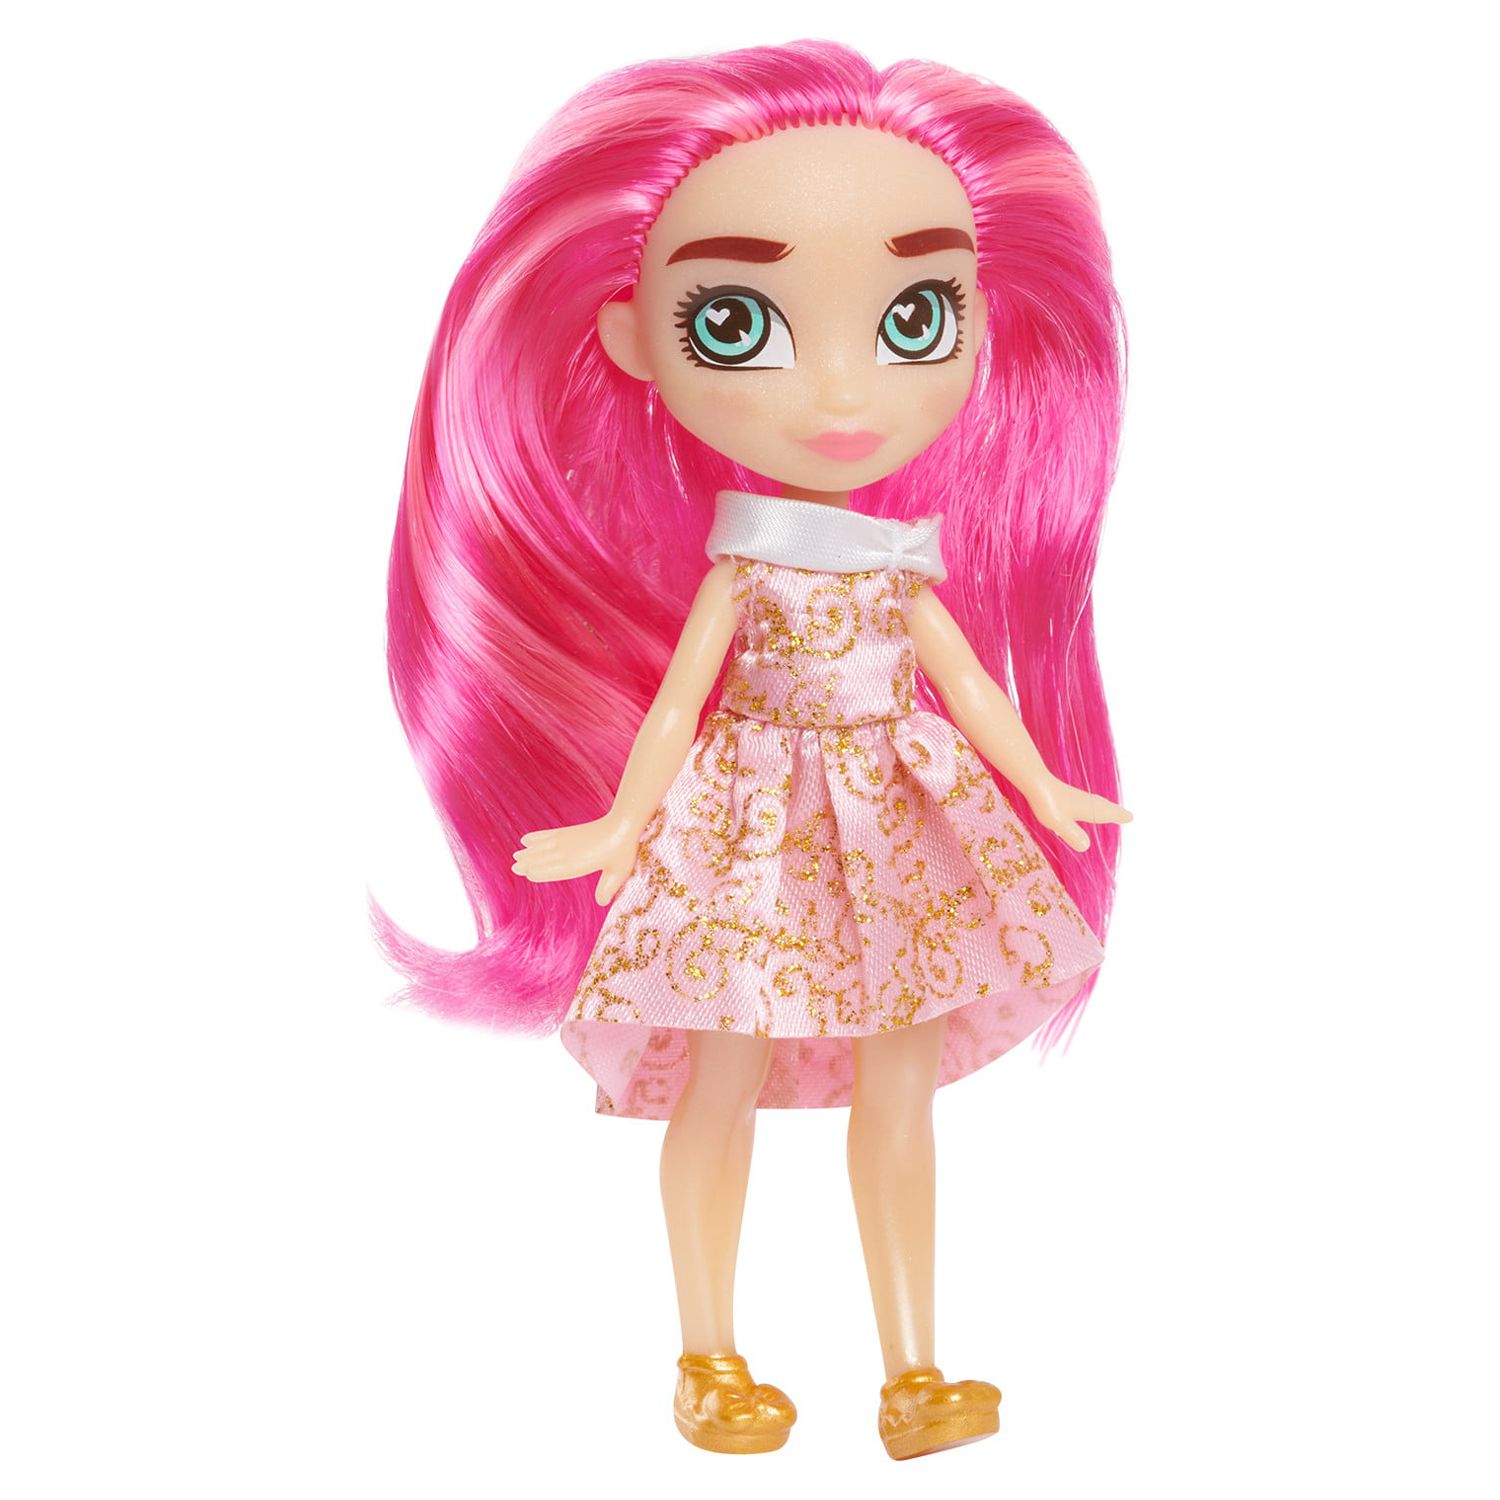 Hairmazing 10-Pack Collectible Small Dolls Set, Kids Toys for Ages 3 up - image 10 of 15